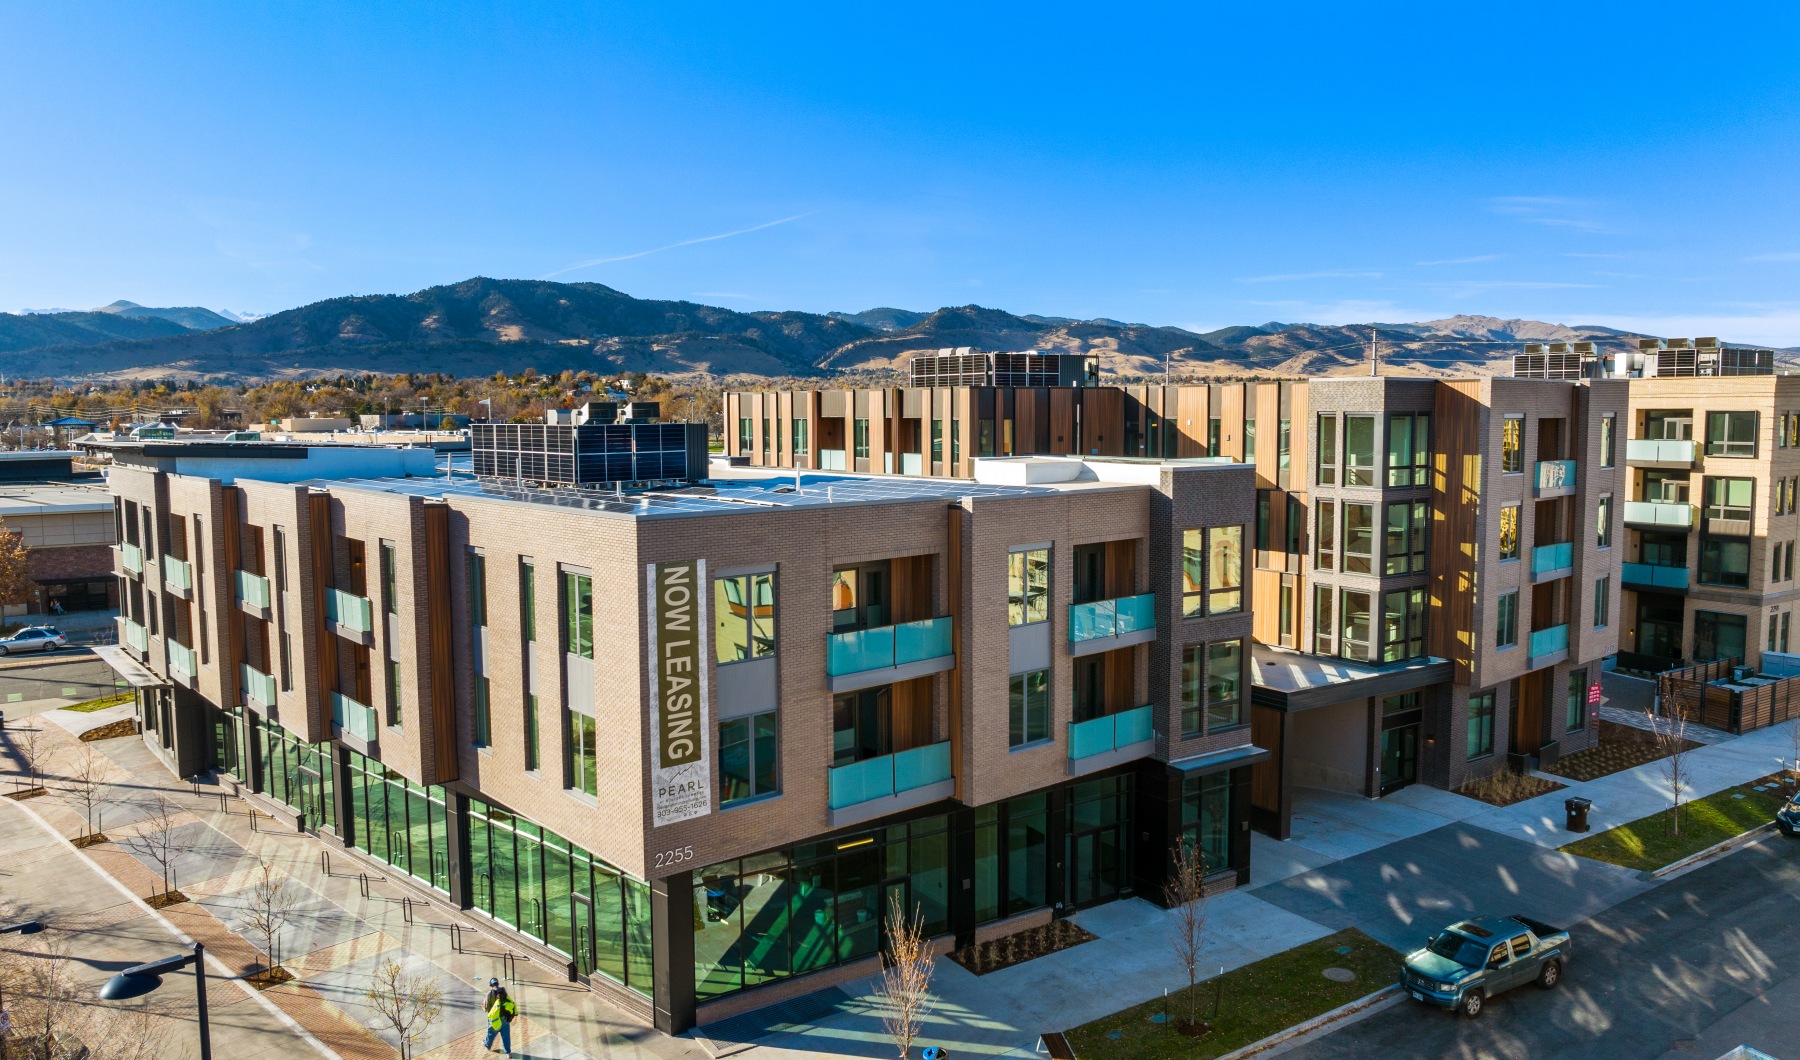 Mountain views over Pearl at Boulder Commons